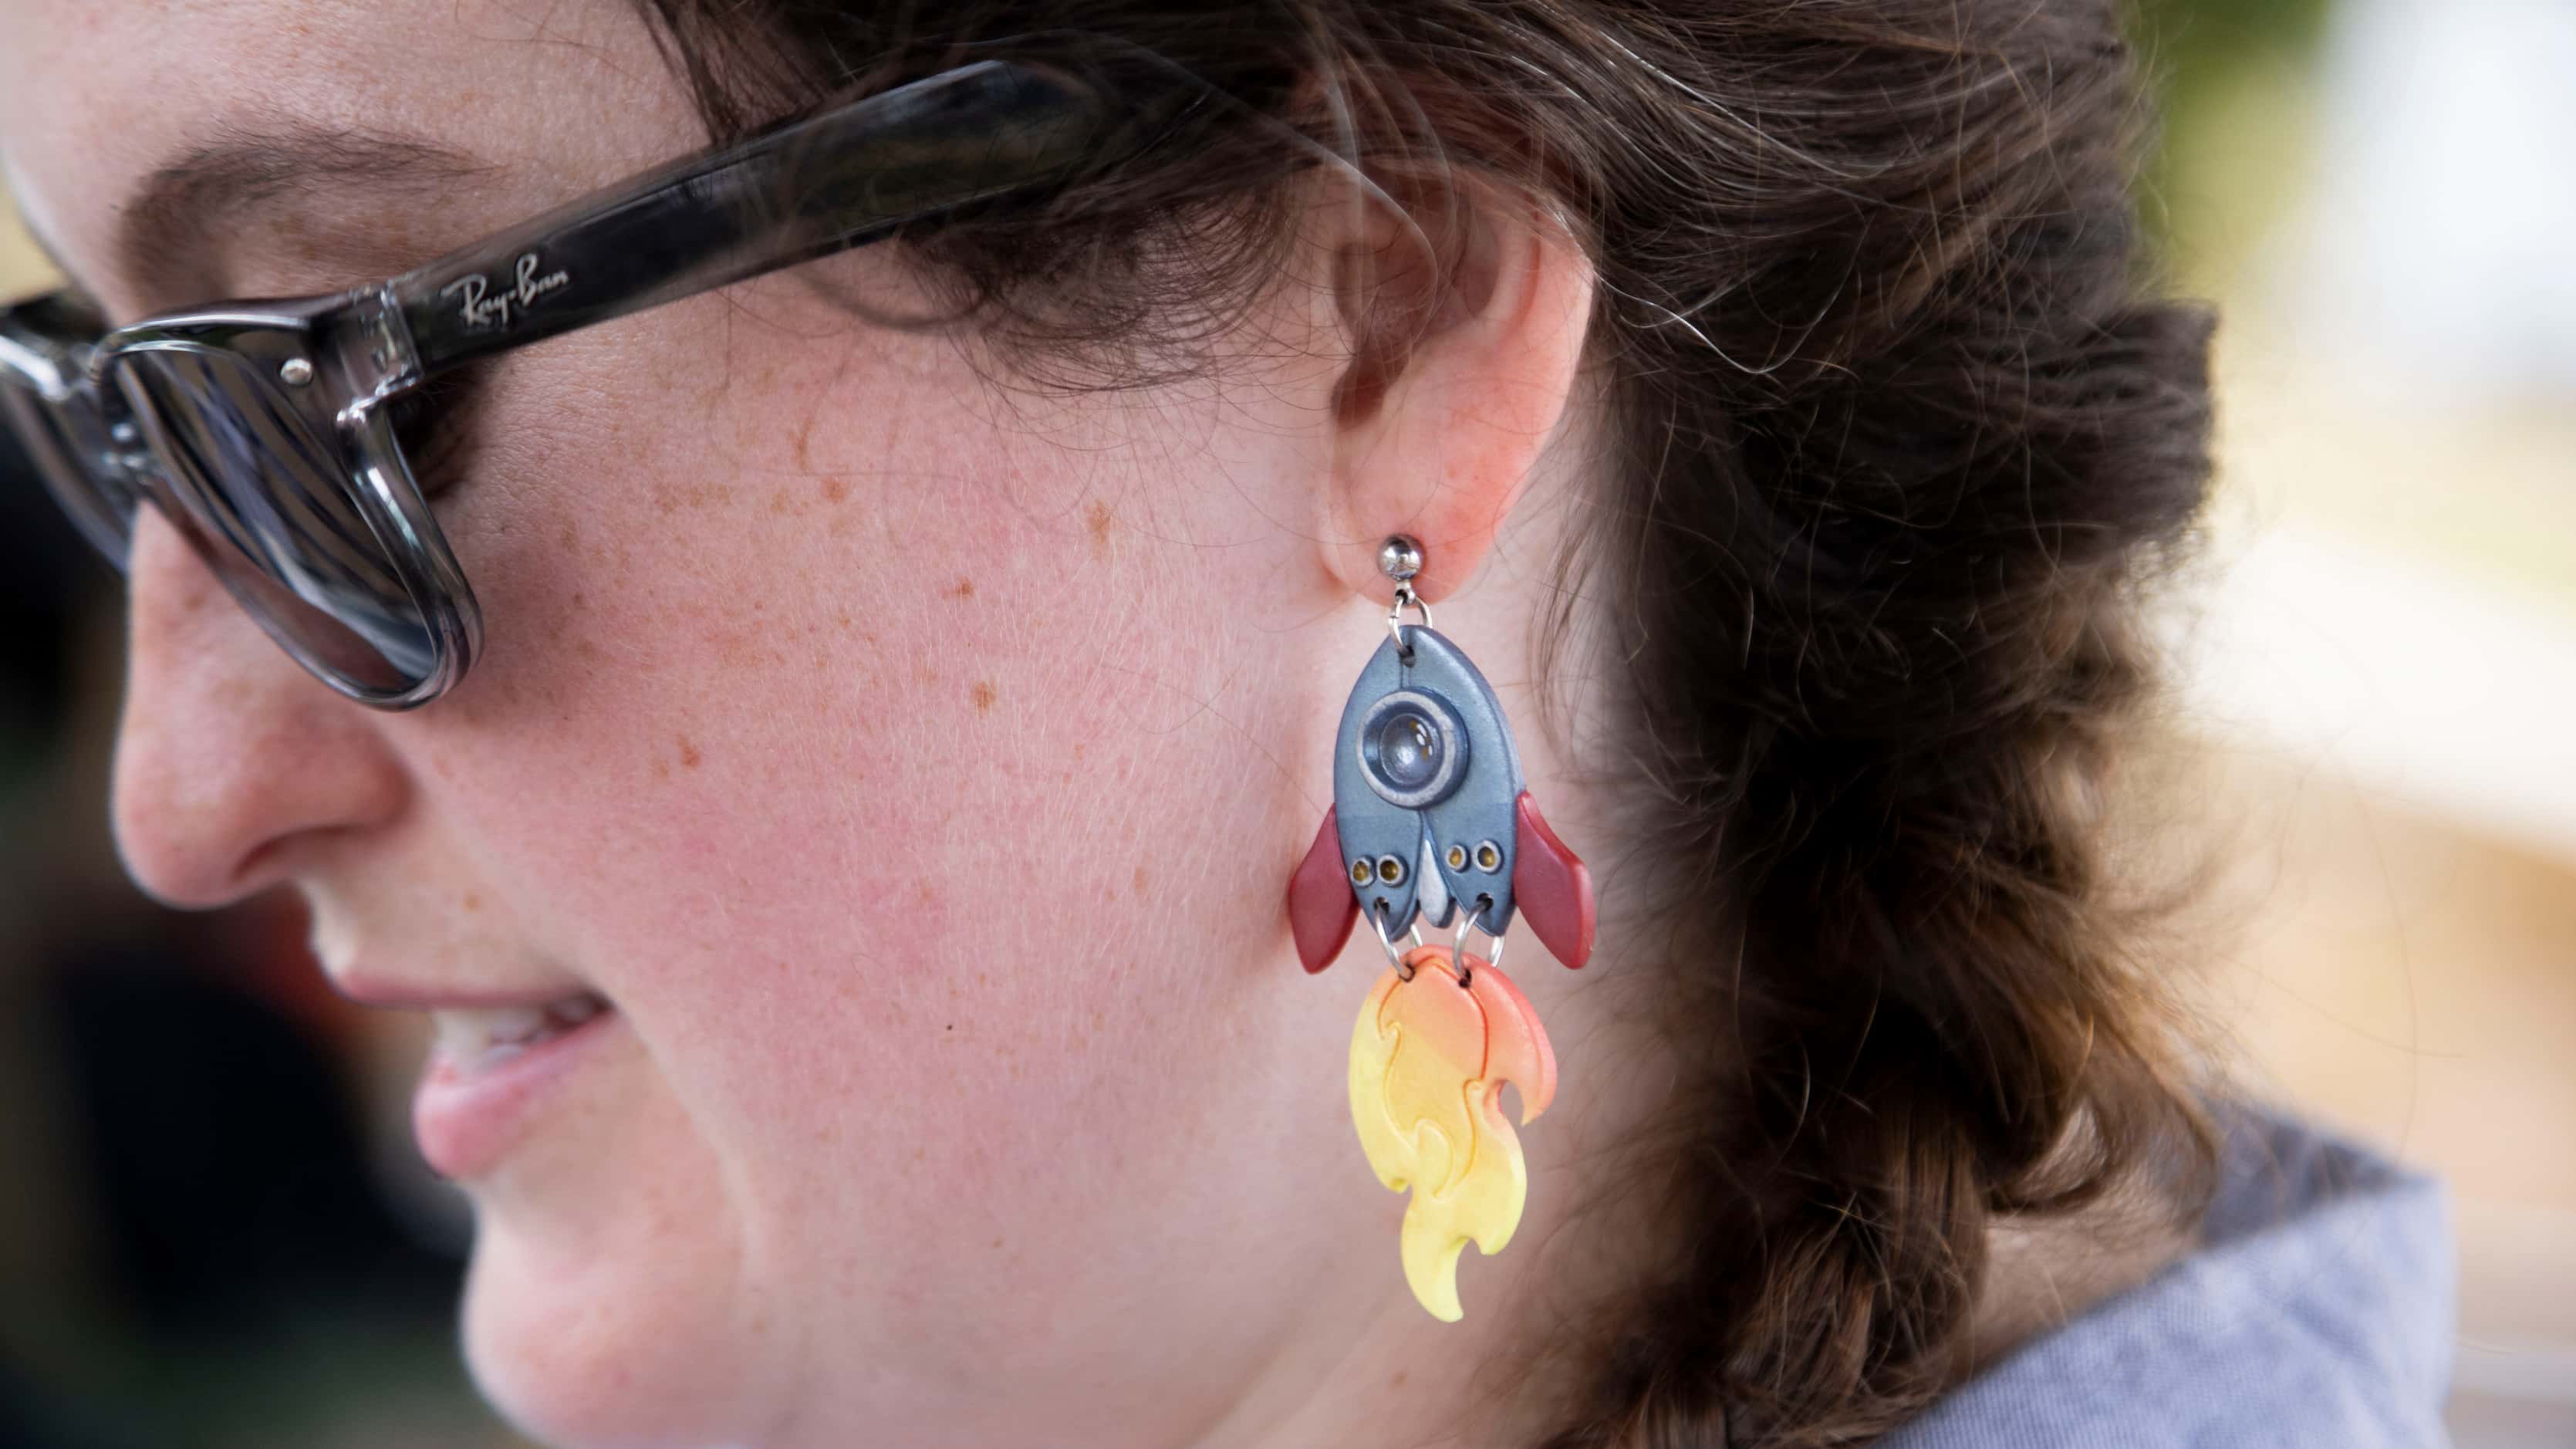 Nicole Sjoblom, partnership & outreach manager at Estes Education, wears rocket earrings...